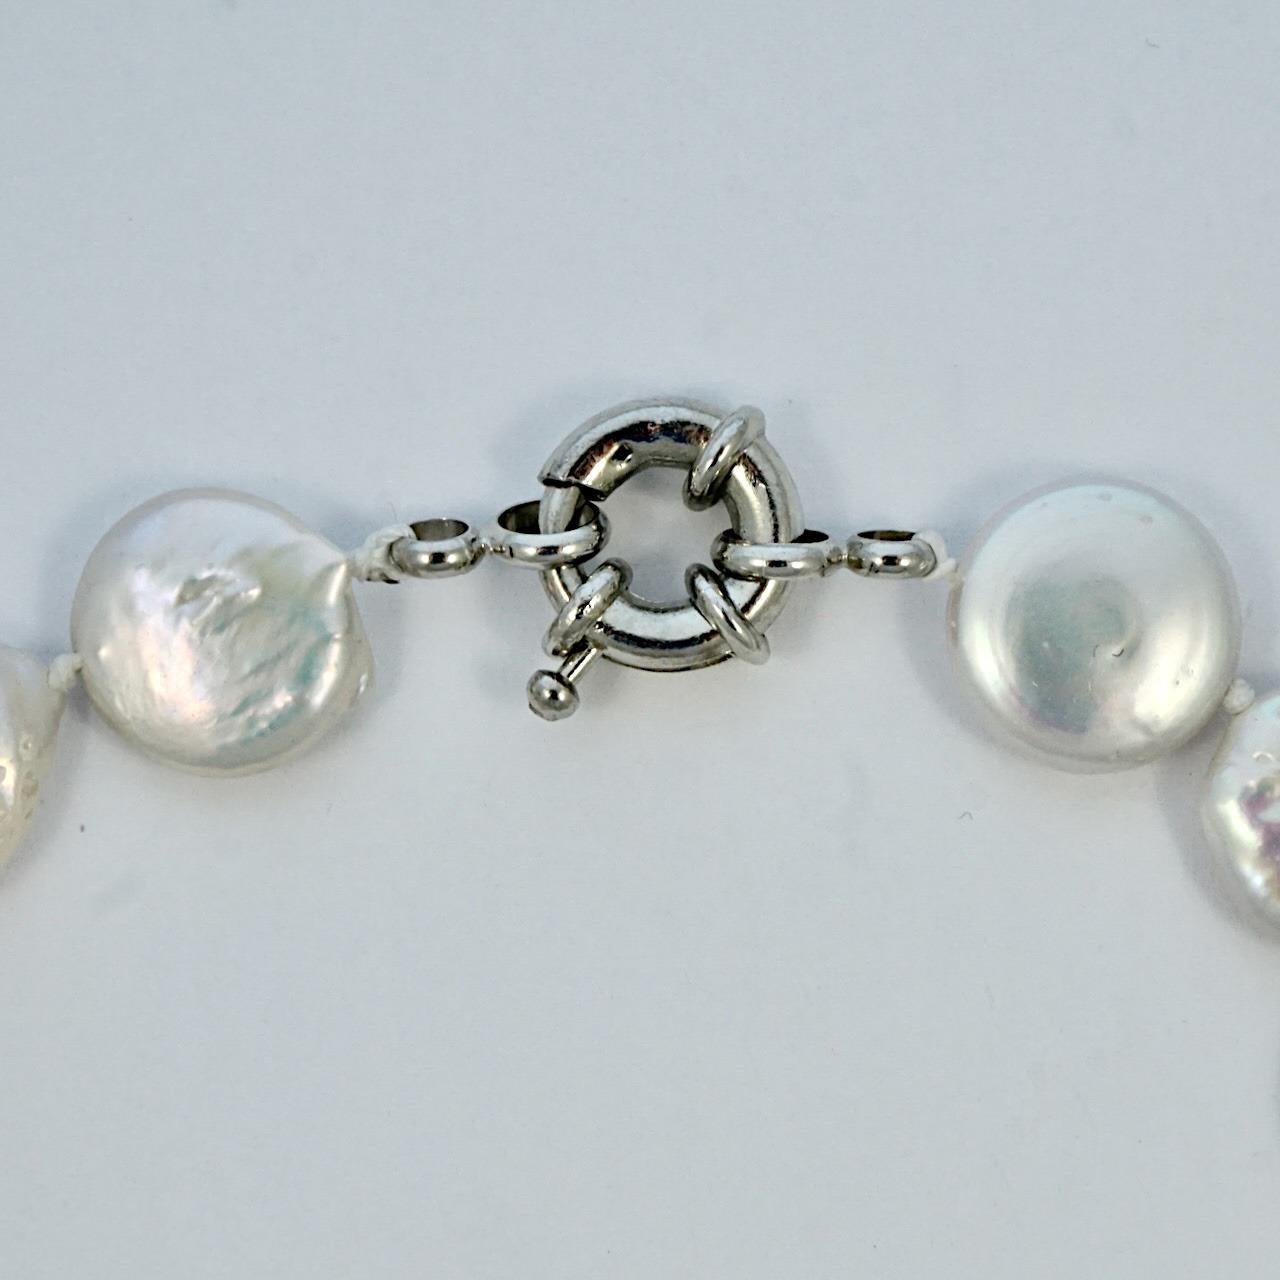 Freshwater Coin Pearl Knotted Necklace with an Iridescent Lustre For Sale 2